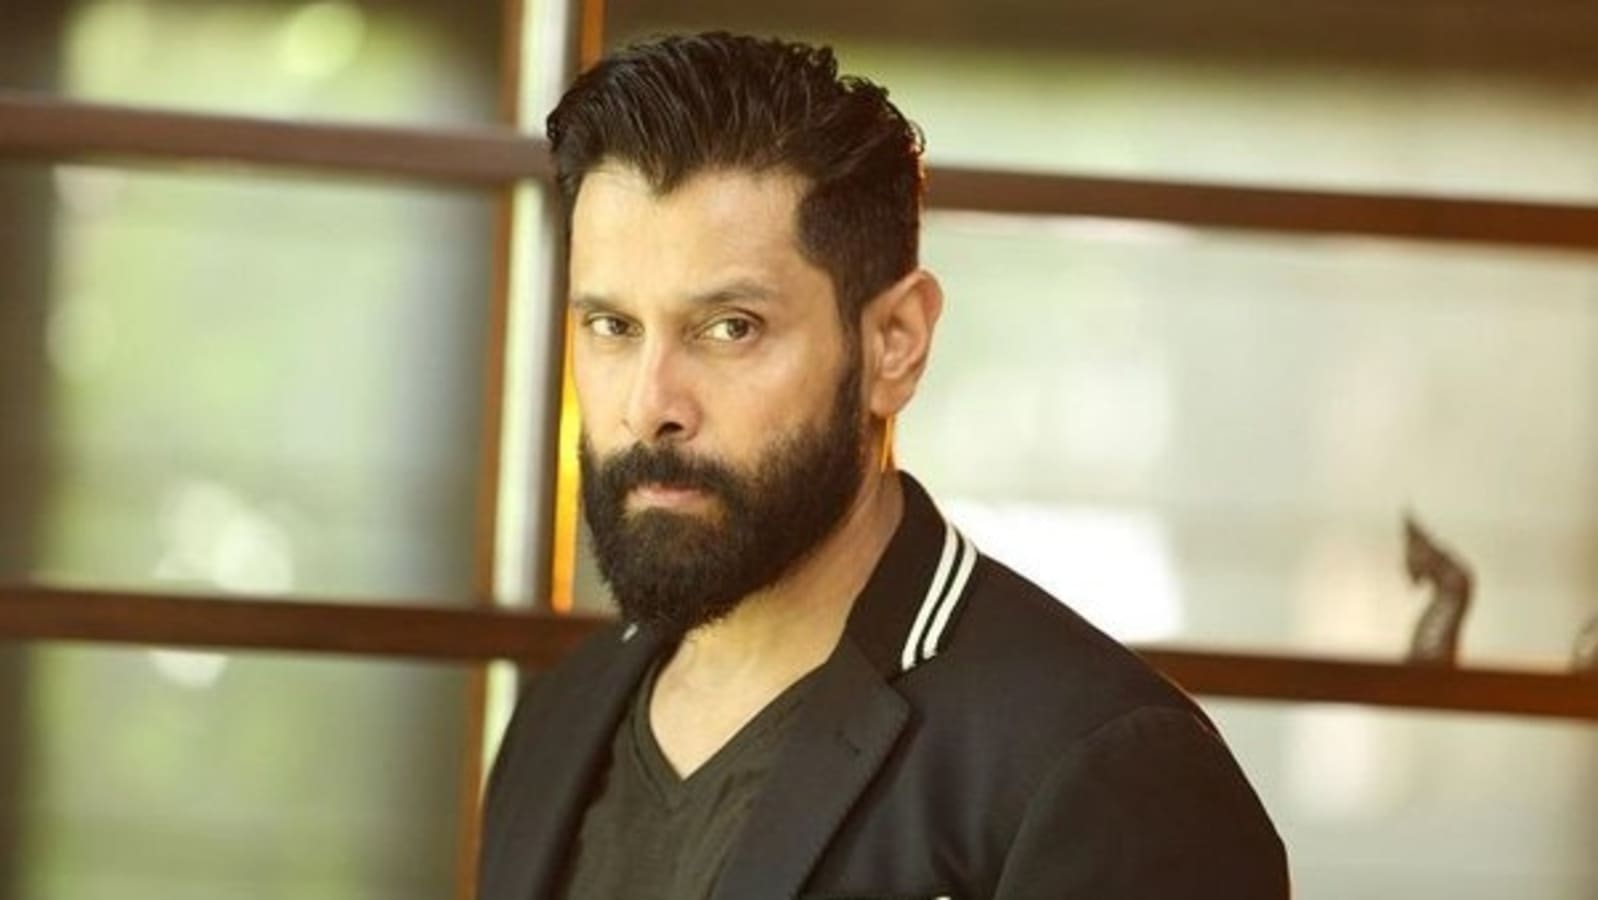 Vikram shares update on recent hospitalisation, says ‘mild chest discomfort’ was ‘blown out of proportion’